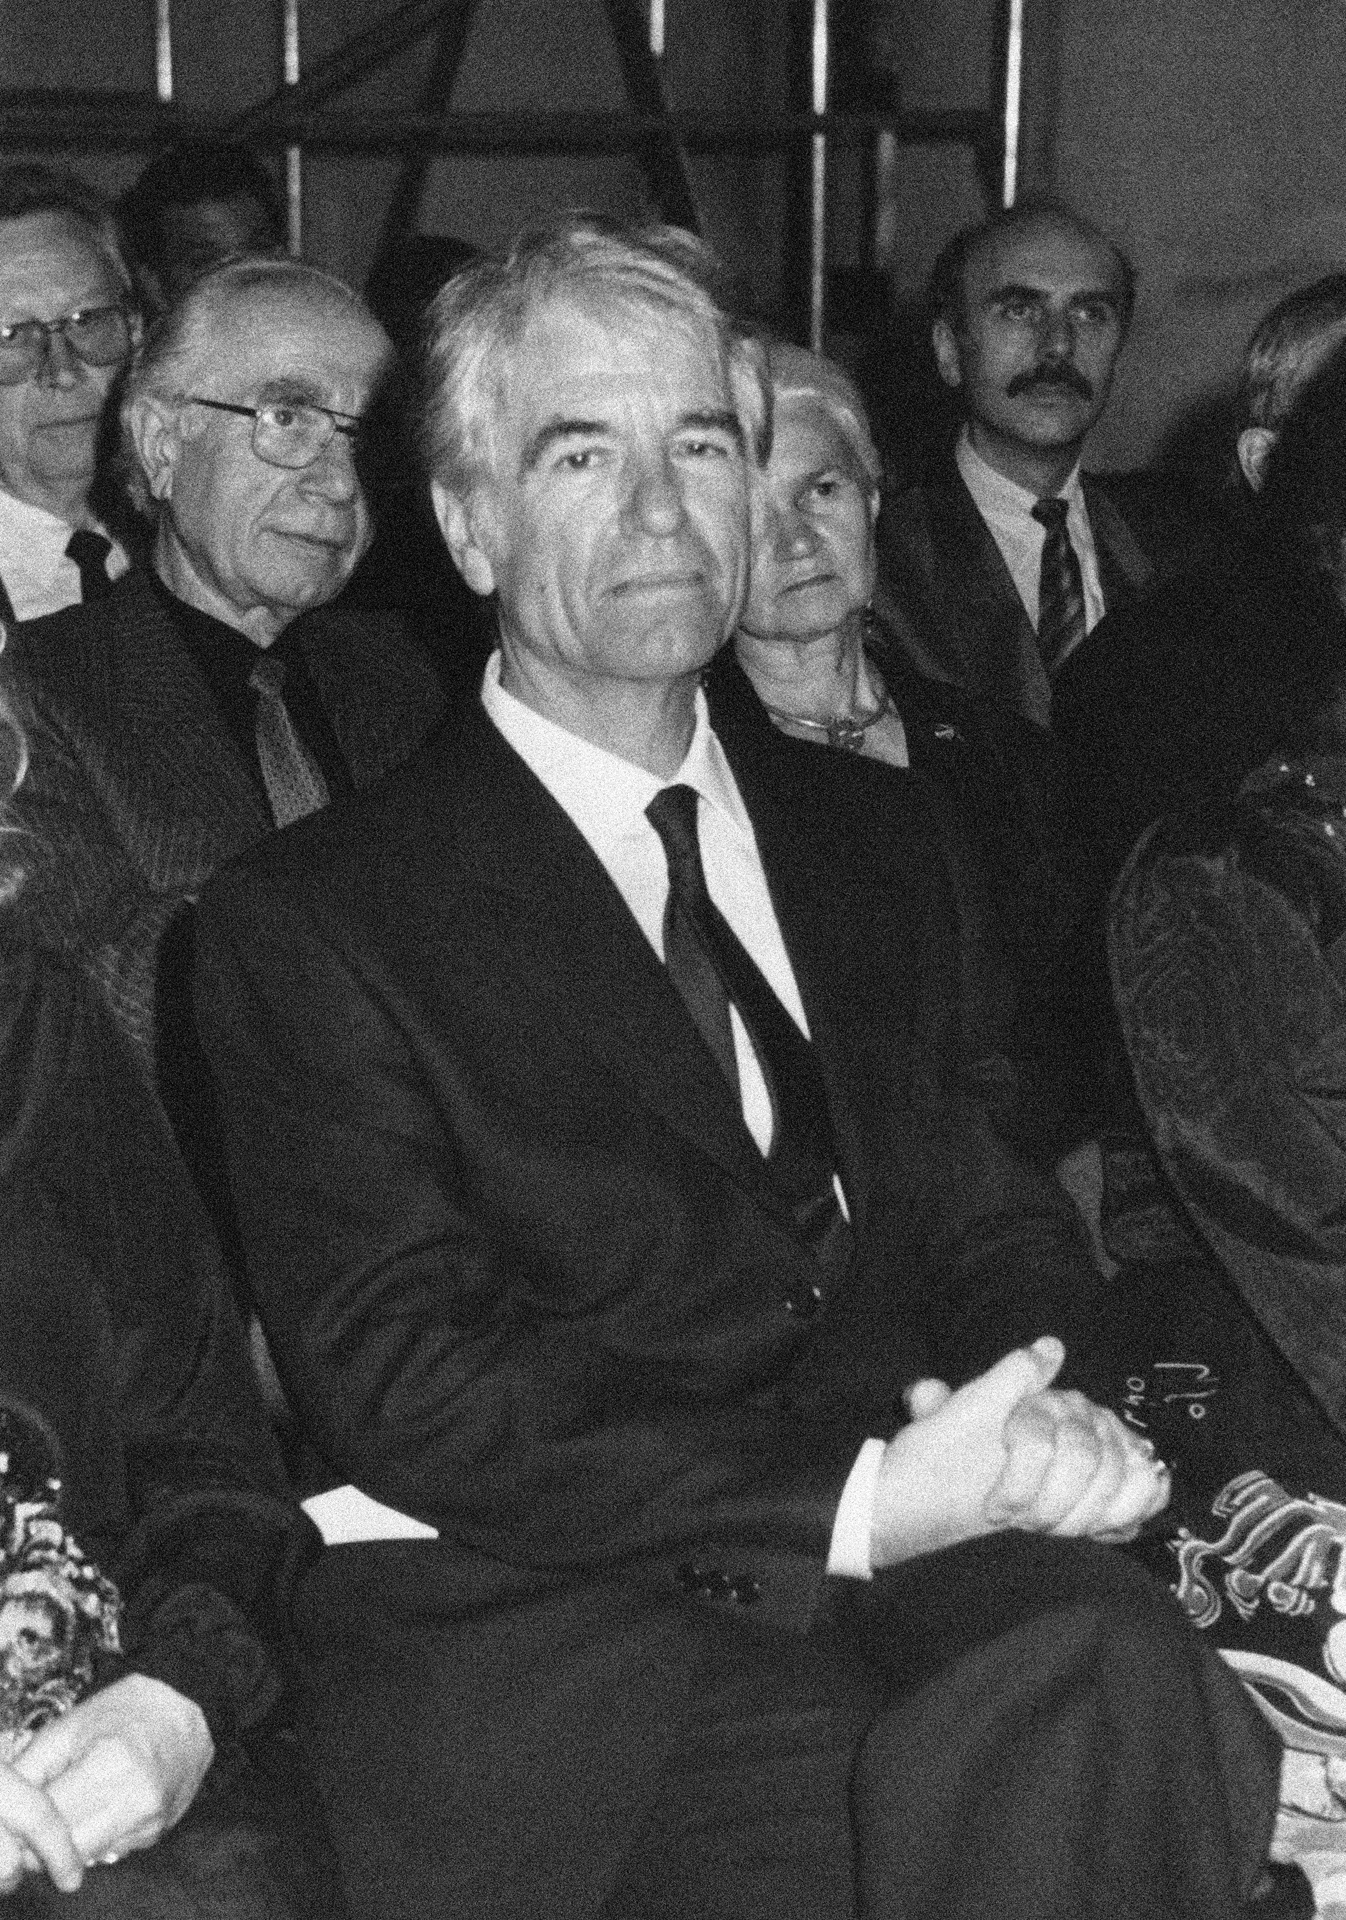 You can see a black and white photograph of Bruno Martinazzi at the award ceremony for the Golden Ring of Honor. The artist, wearing a suit and standing in the middle of the audience, looks directly into the camera.